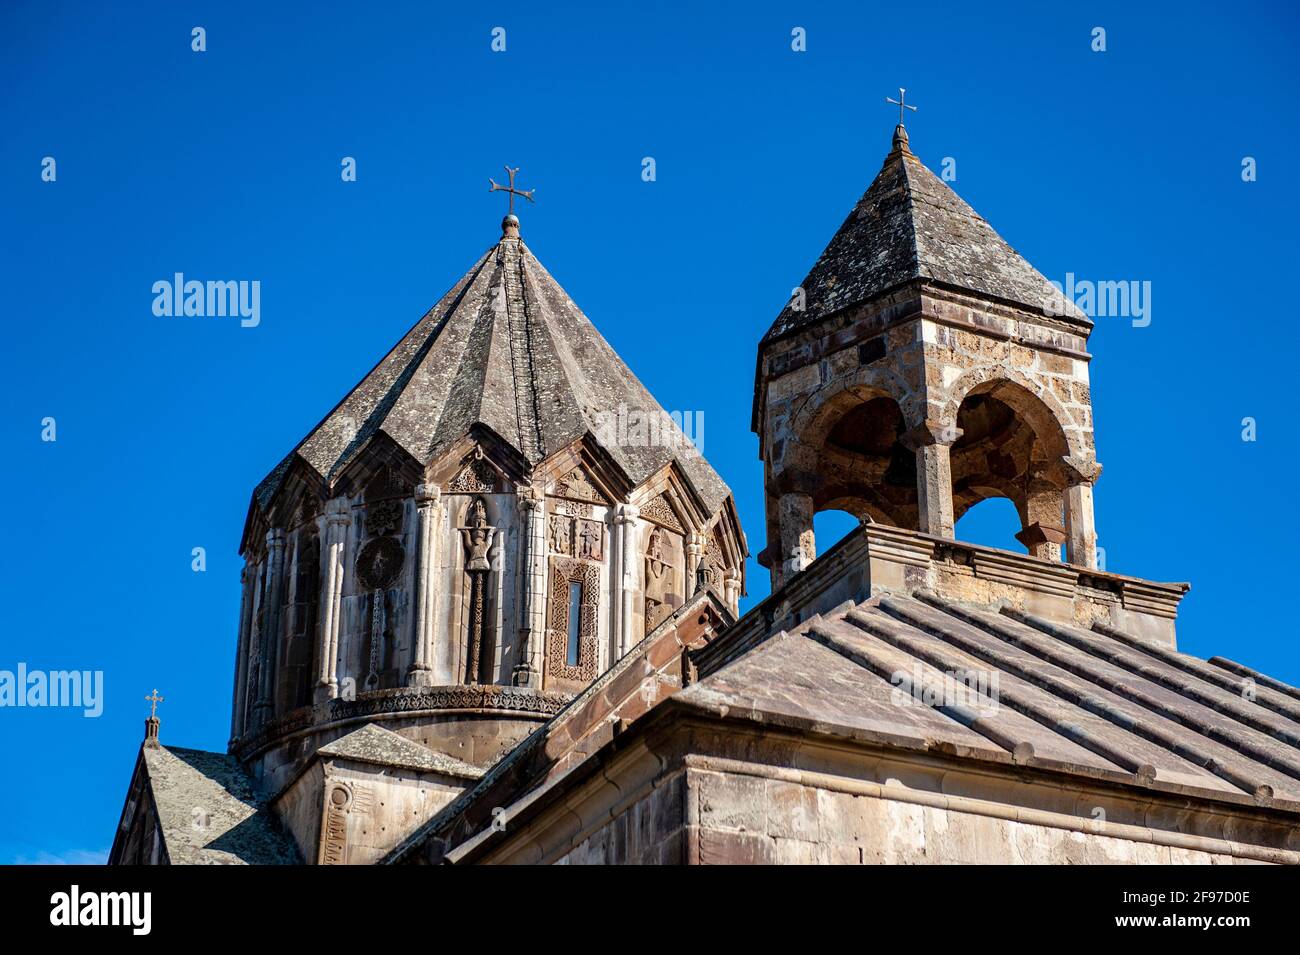 The dome and the bell tower of the Saint John the Baptist church of Gandzasar monastery in Nagorno Karabakh (Artsakh) Republic Stock Photo